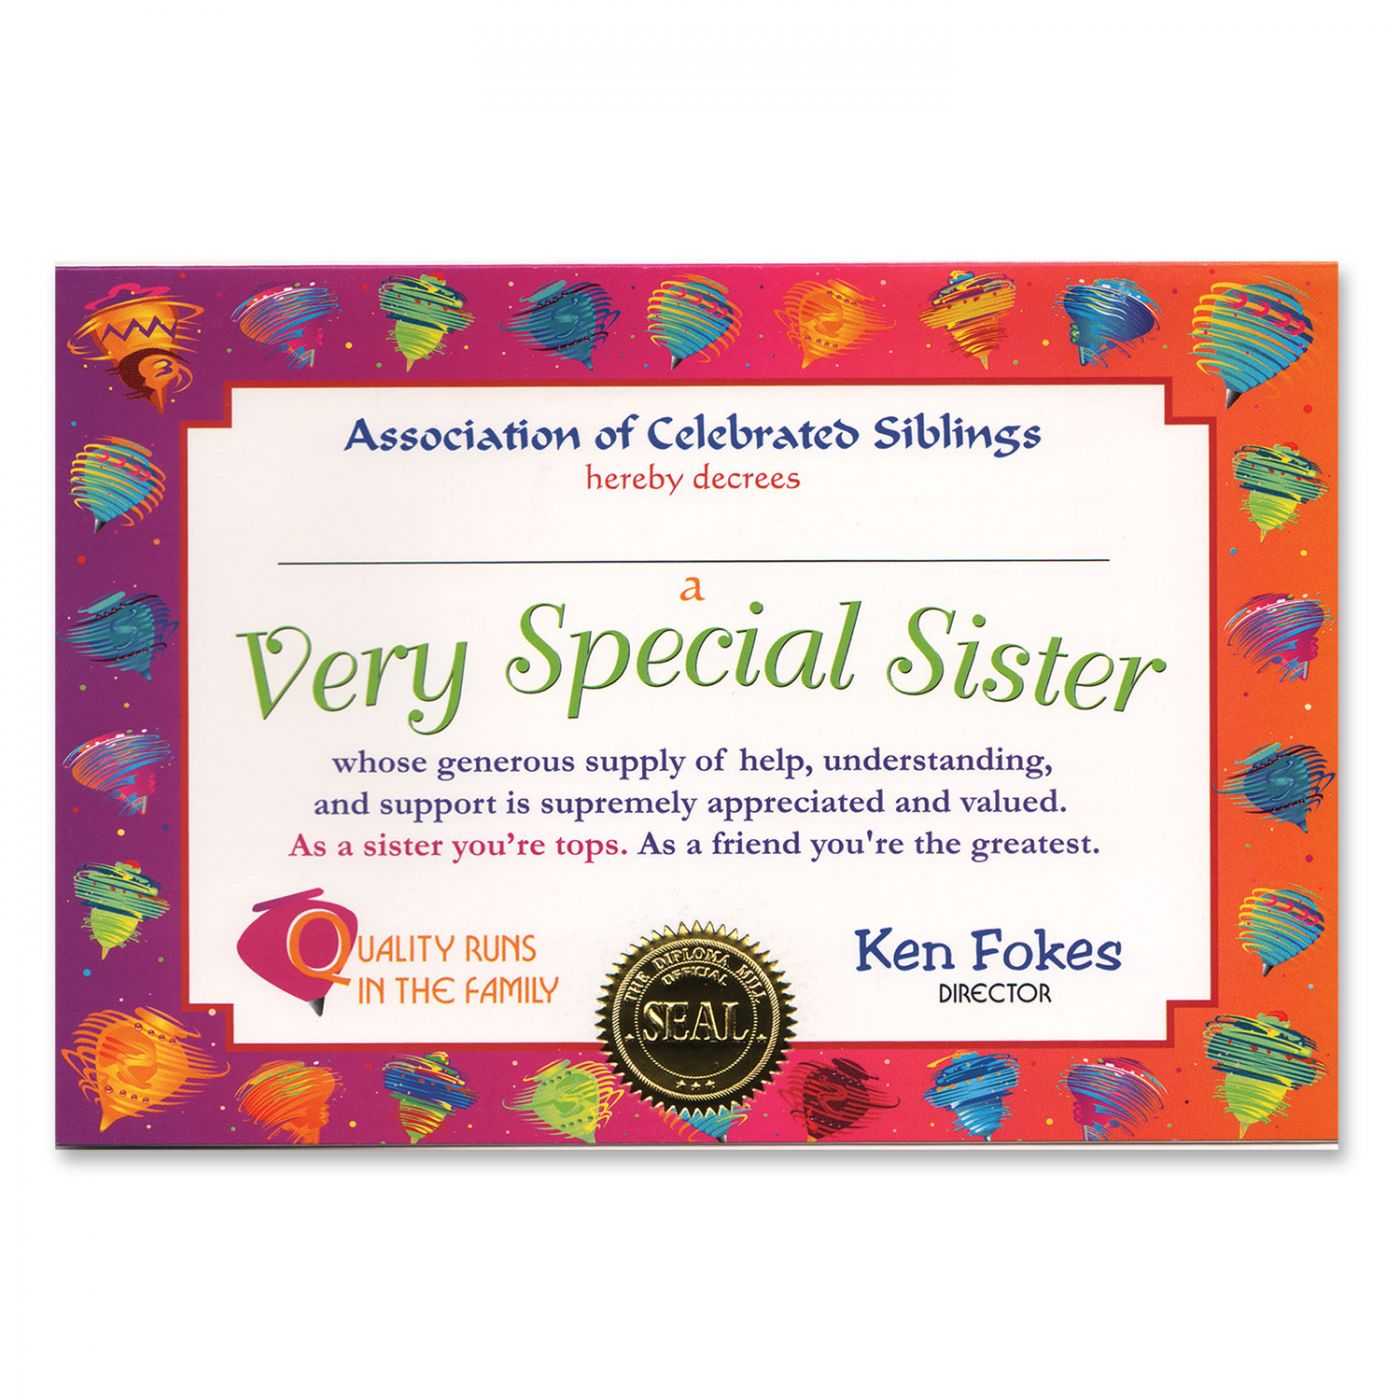 Very Special Sister Certificate (6) image